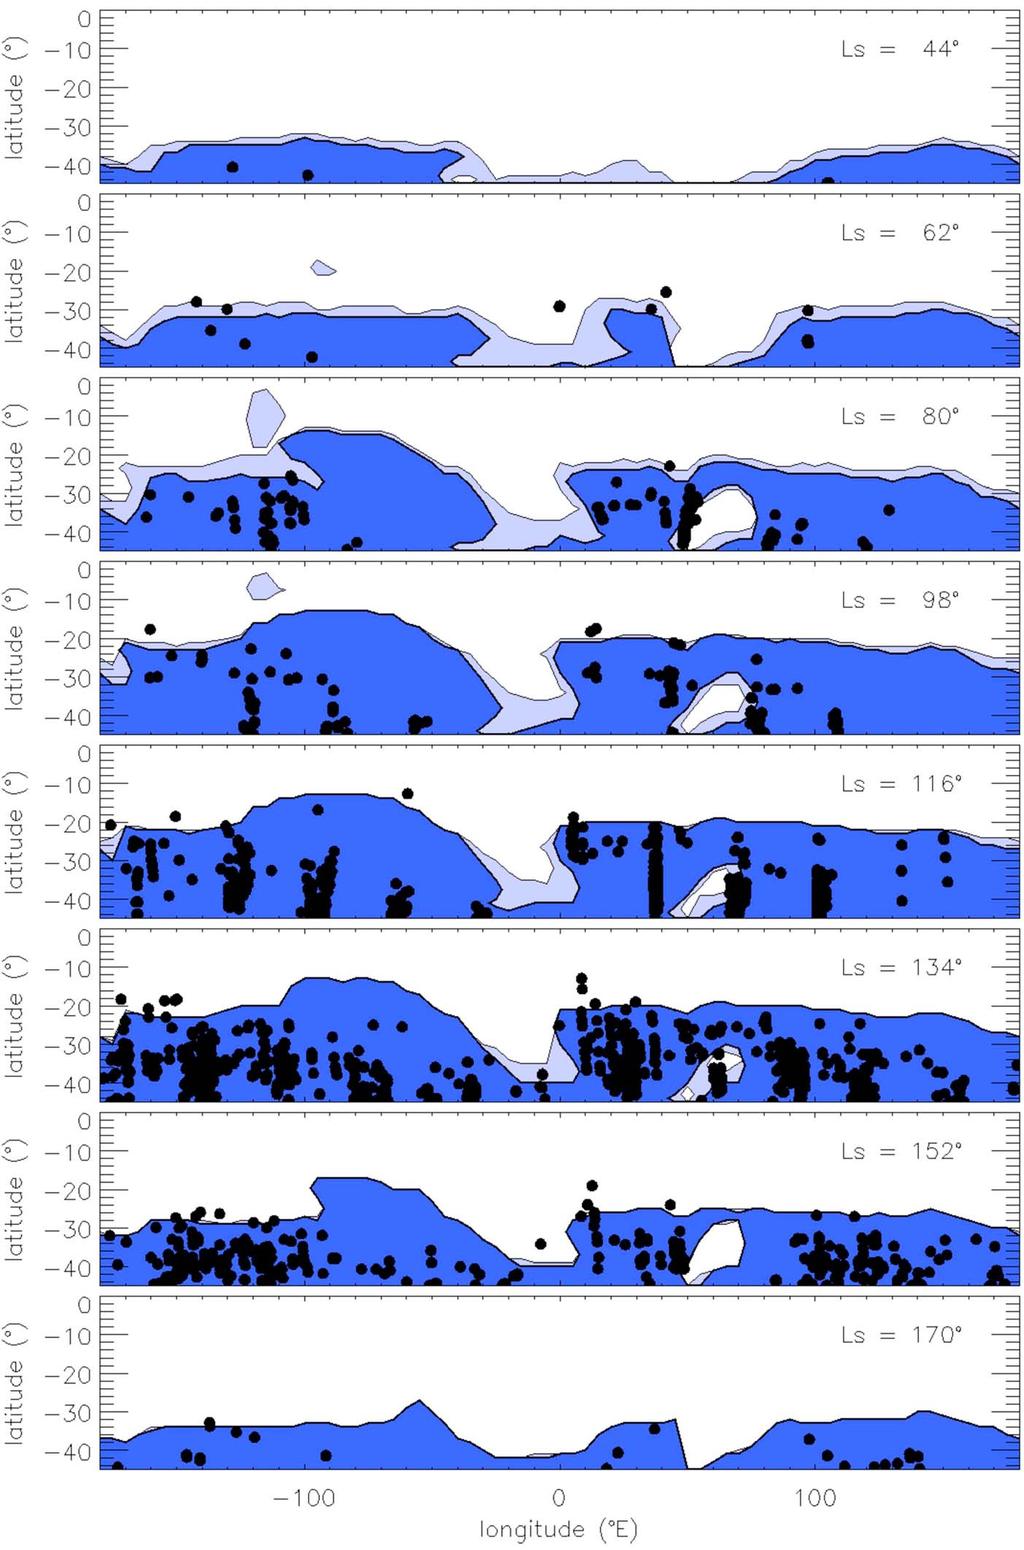 Figure 5. Predicted area of ice deposits on slopes (dark blue, 5mm thick and more; light blue, 2mm thick) compared to observations (dots). Model predictions are shown for 8 solar longitudes.